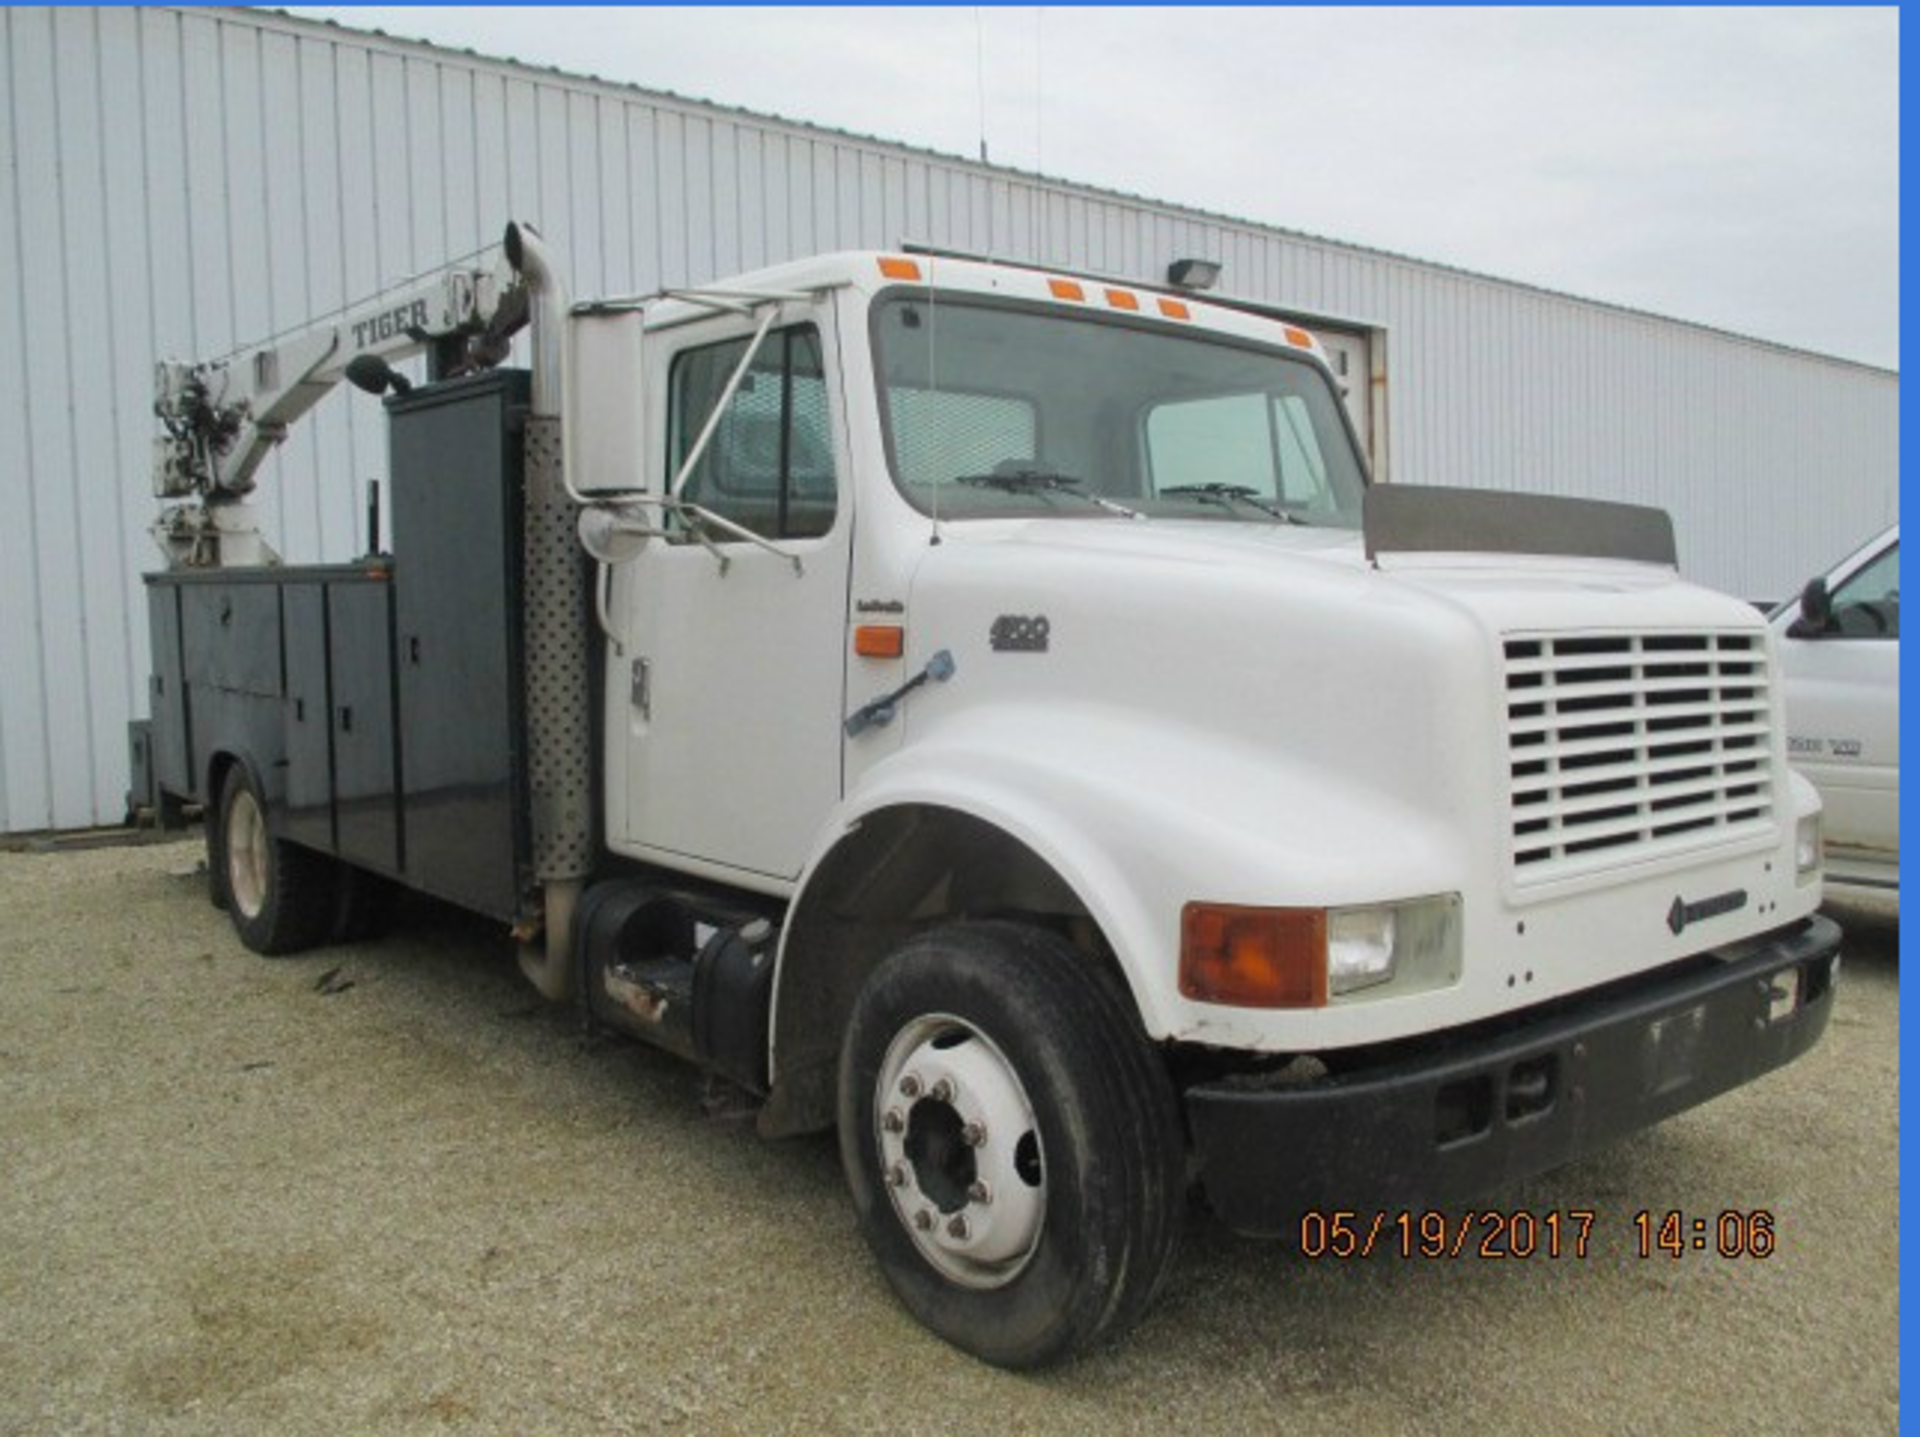 Full Catalog Coming Soon! HEAVY EQUIPMENT , TRUCKS, AG MACHINERY CONSIGNMENT AUCTION - Image 5 of 5